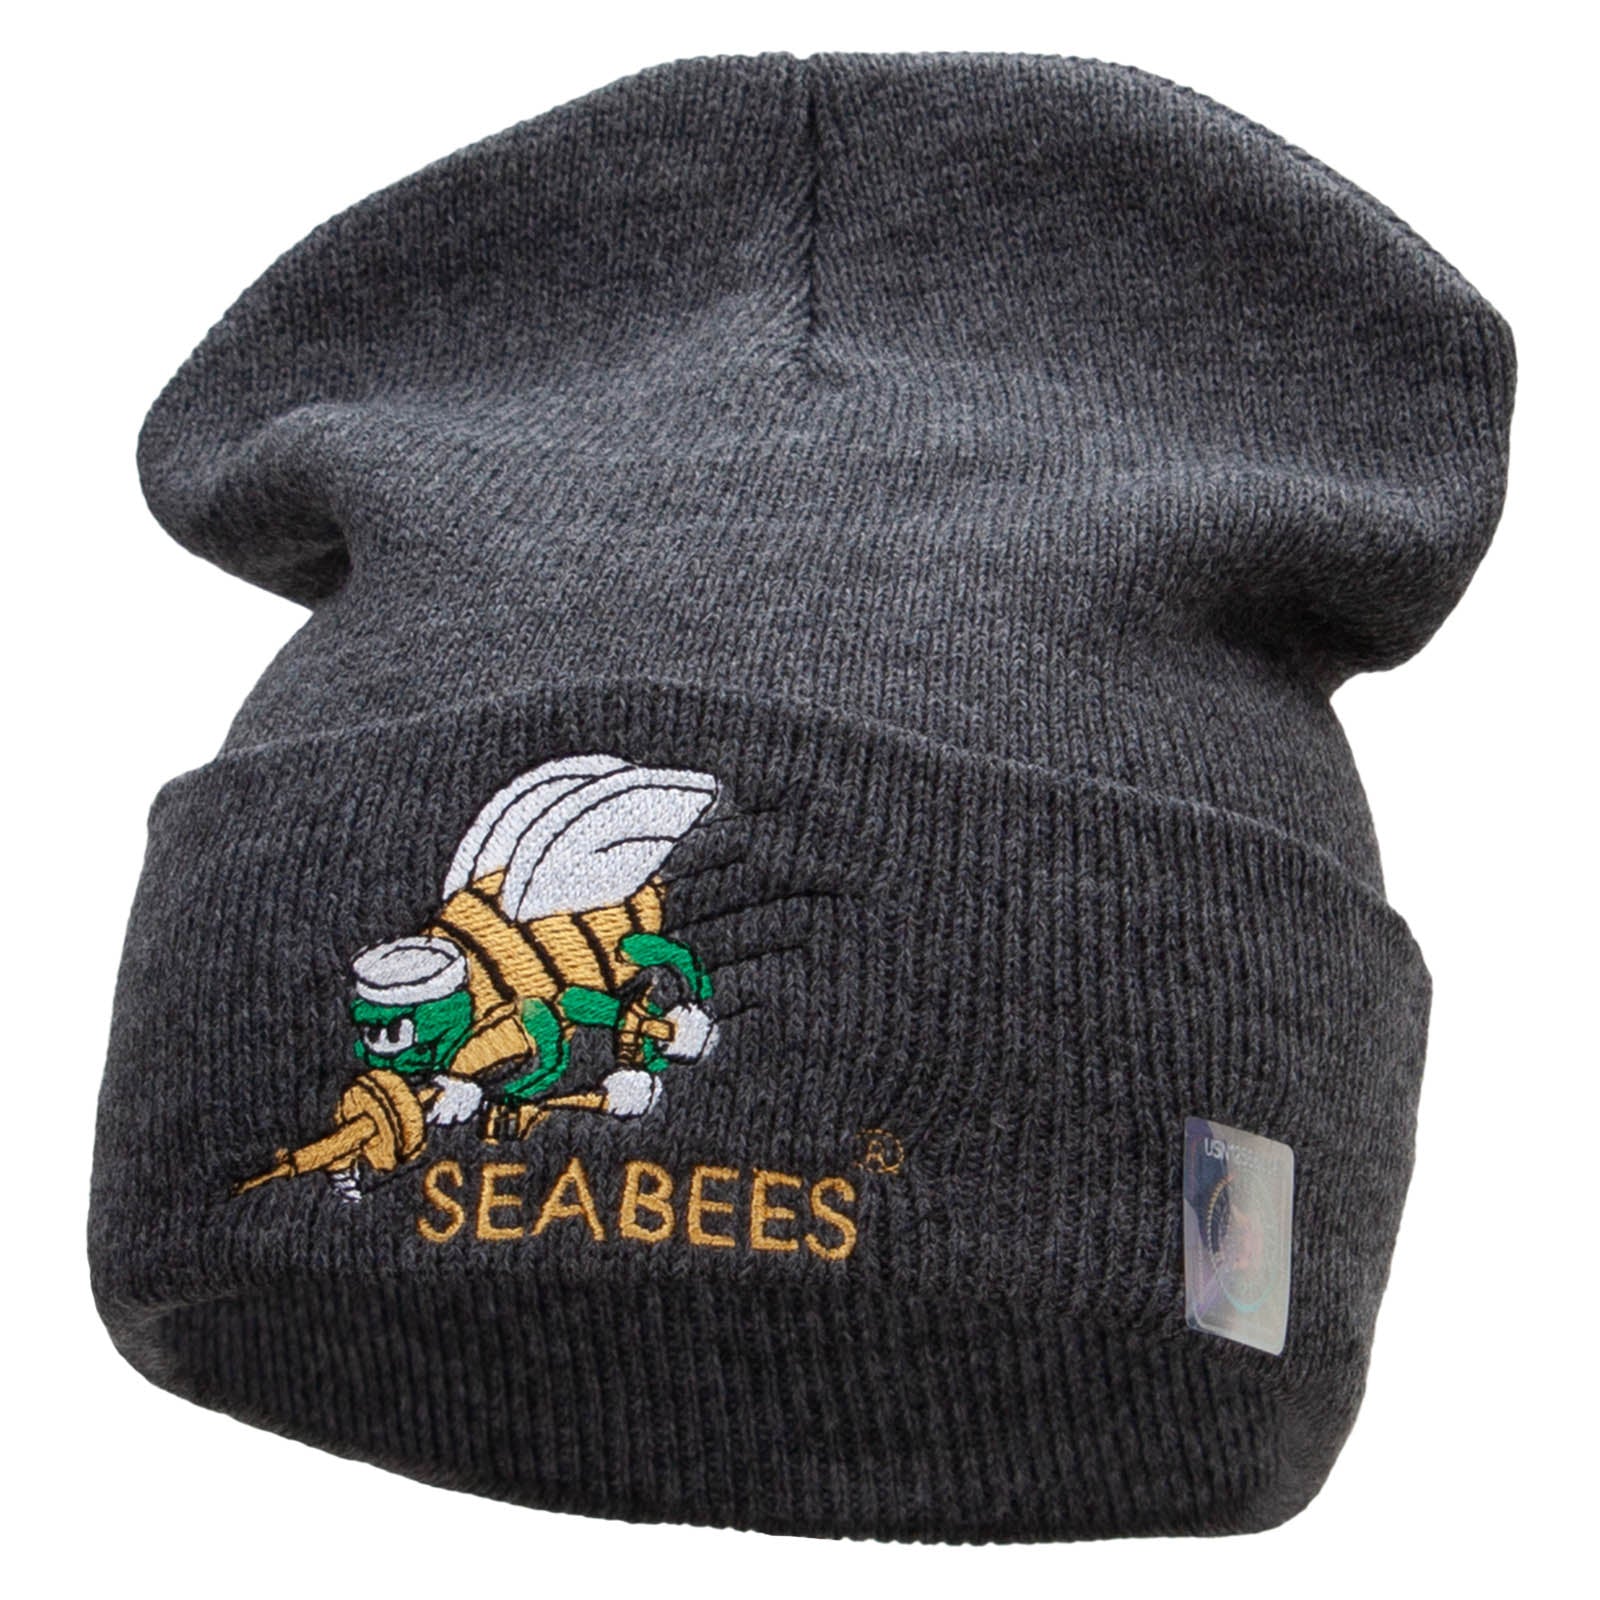 Licensed Navy Seabees Symbol Embroidered Cuff Long Beanie Made in USA - Dk Grey OSFM